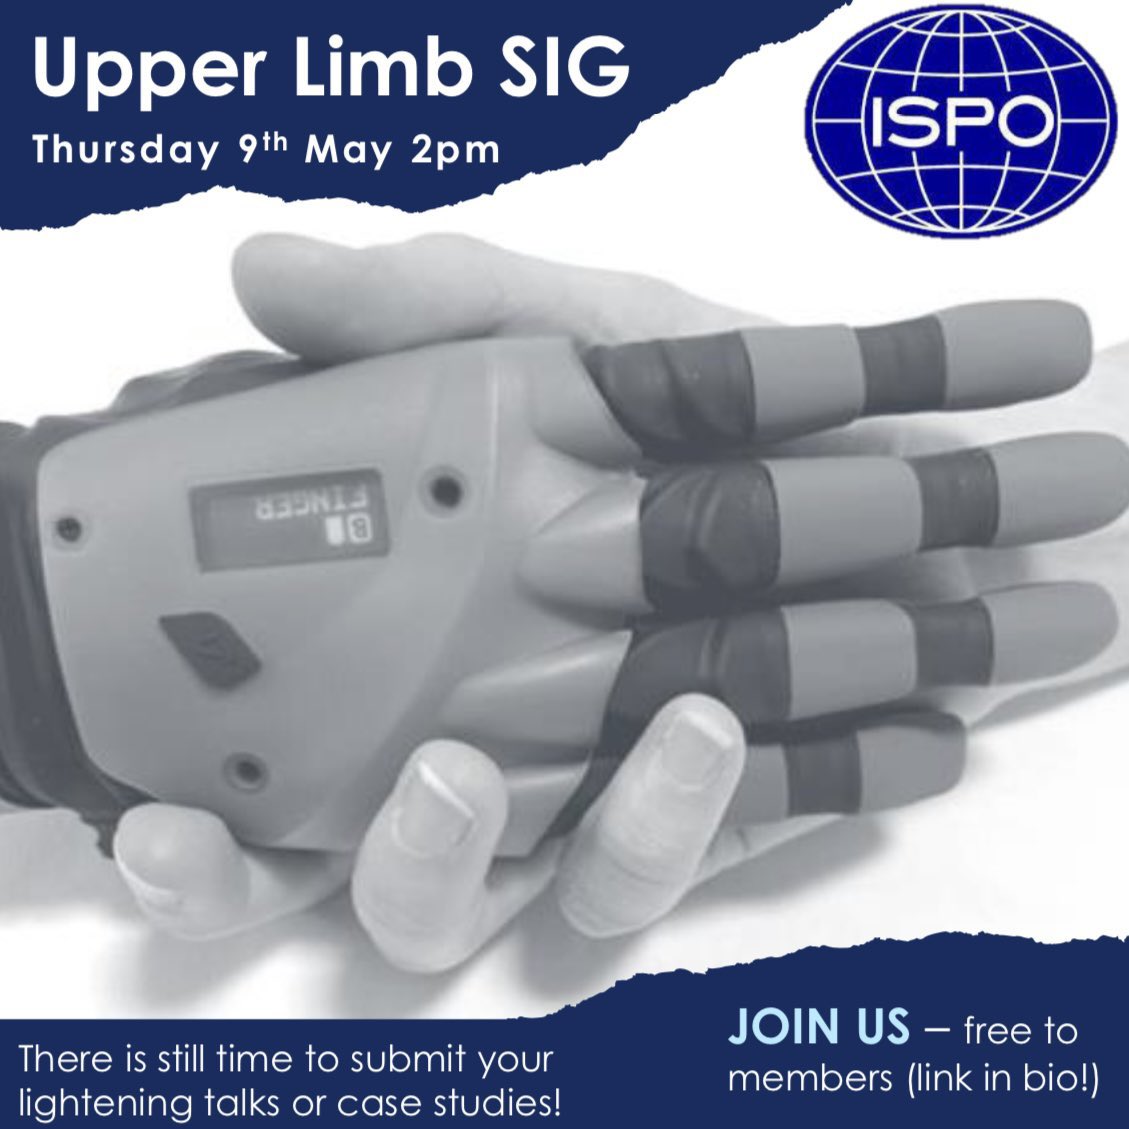 One week until our next upper limb SIG. There is still time to sign up via our website! ispo.org.uk/events/38-sig-… #ISPOUK #upperlimbprosthetics